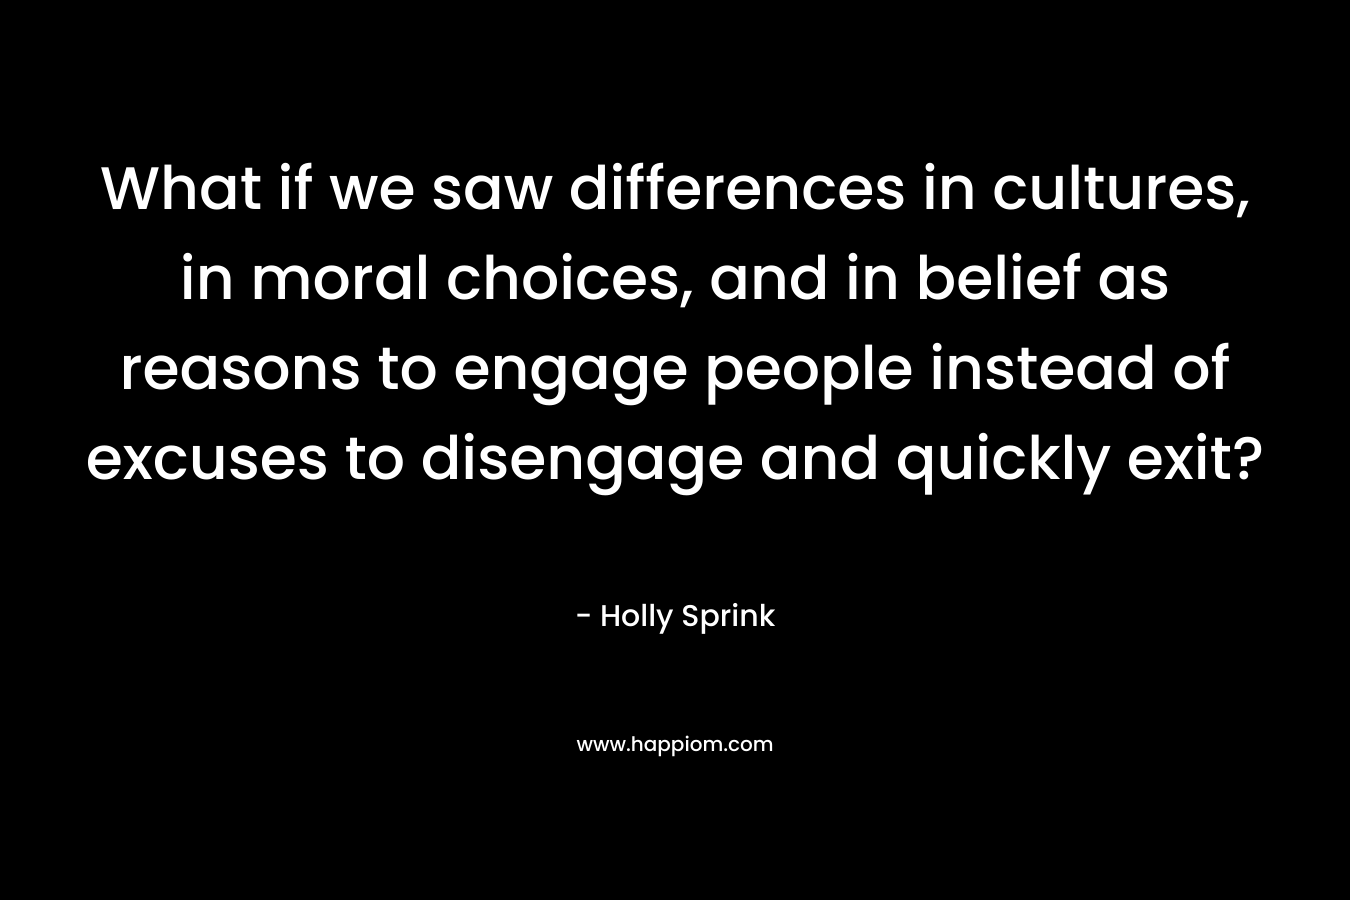 What if we saw differences in cultures, in moral choices, and in belief as reasons to engage people instead of excuses to disengage and quickly exit? – Holly Sprink